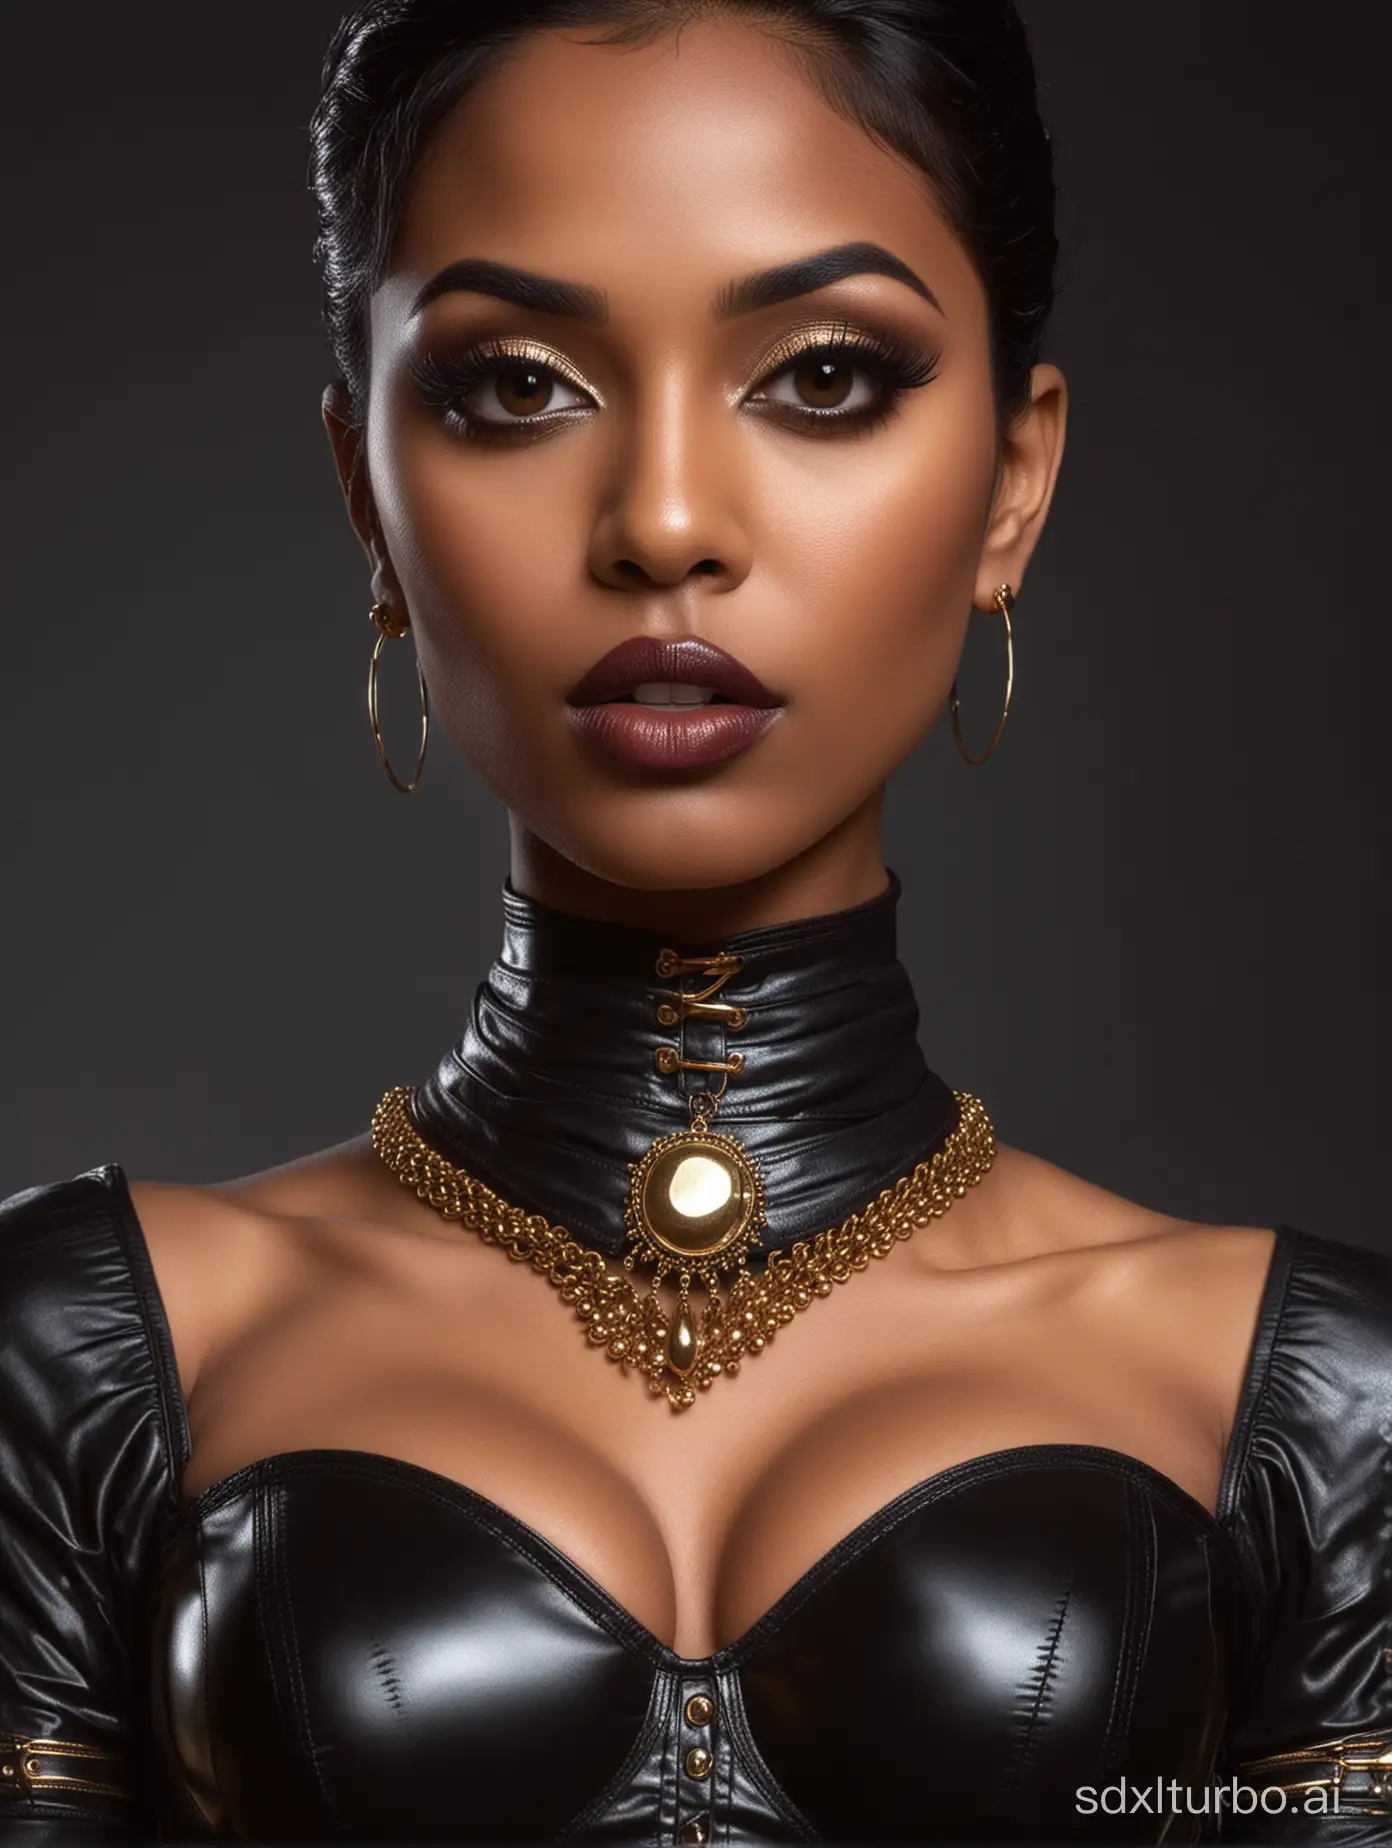 Tamil-Dominatrix-Woman-in-Glossy-Leather-Corset-with-Gold-Jewelry-and-Dark-Misty-Background